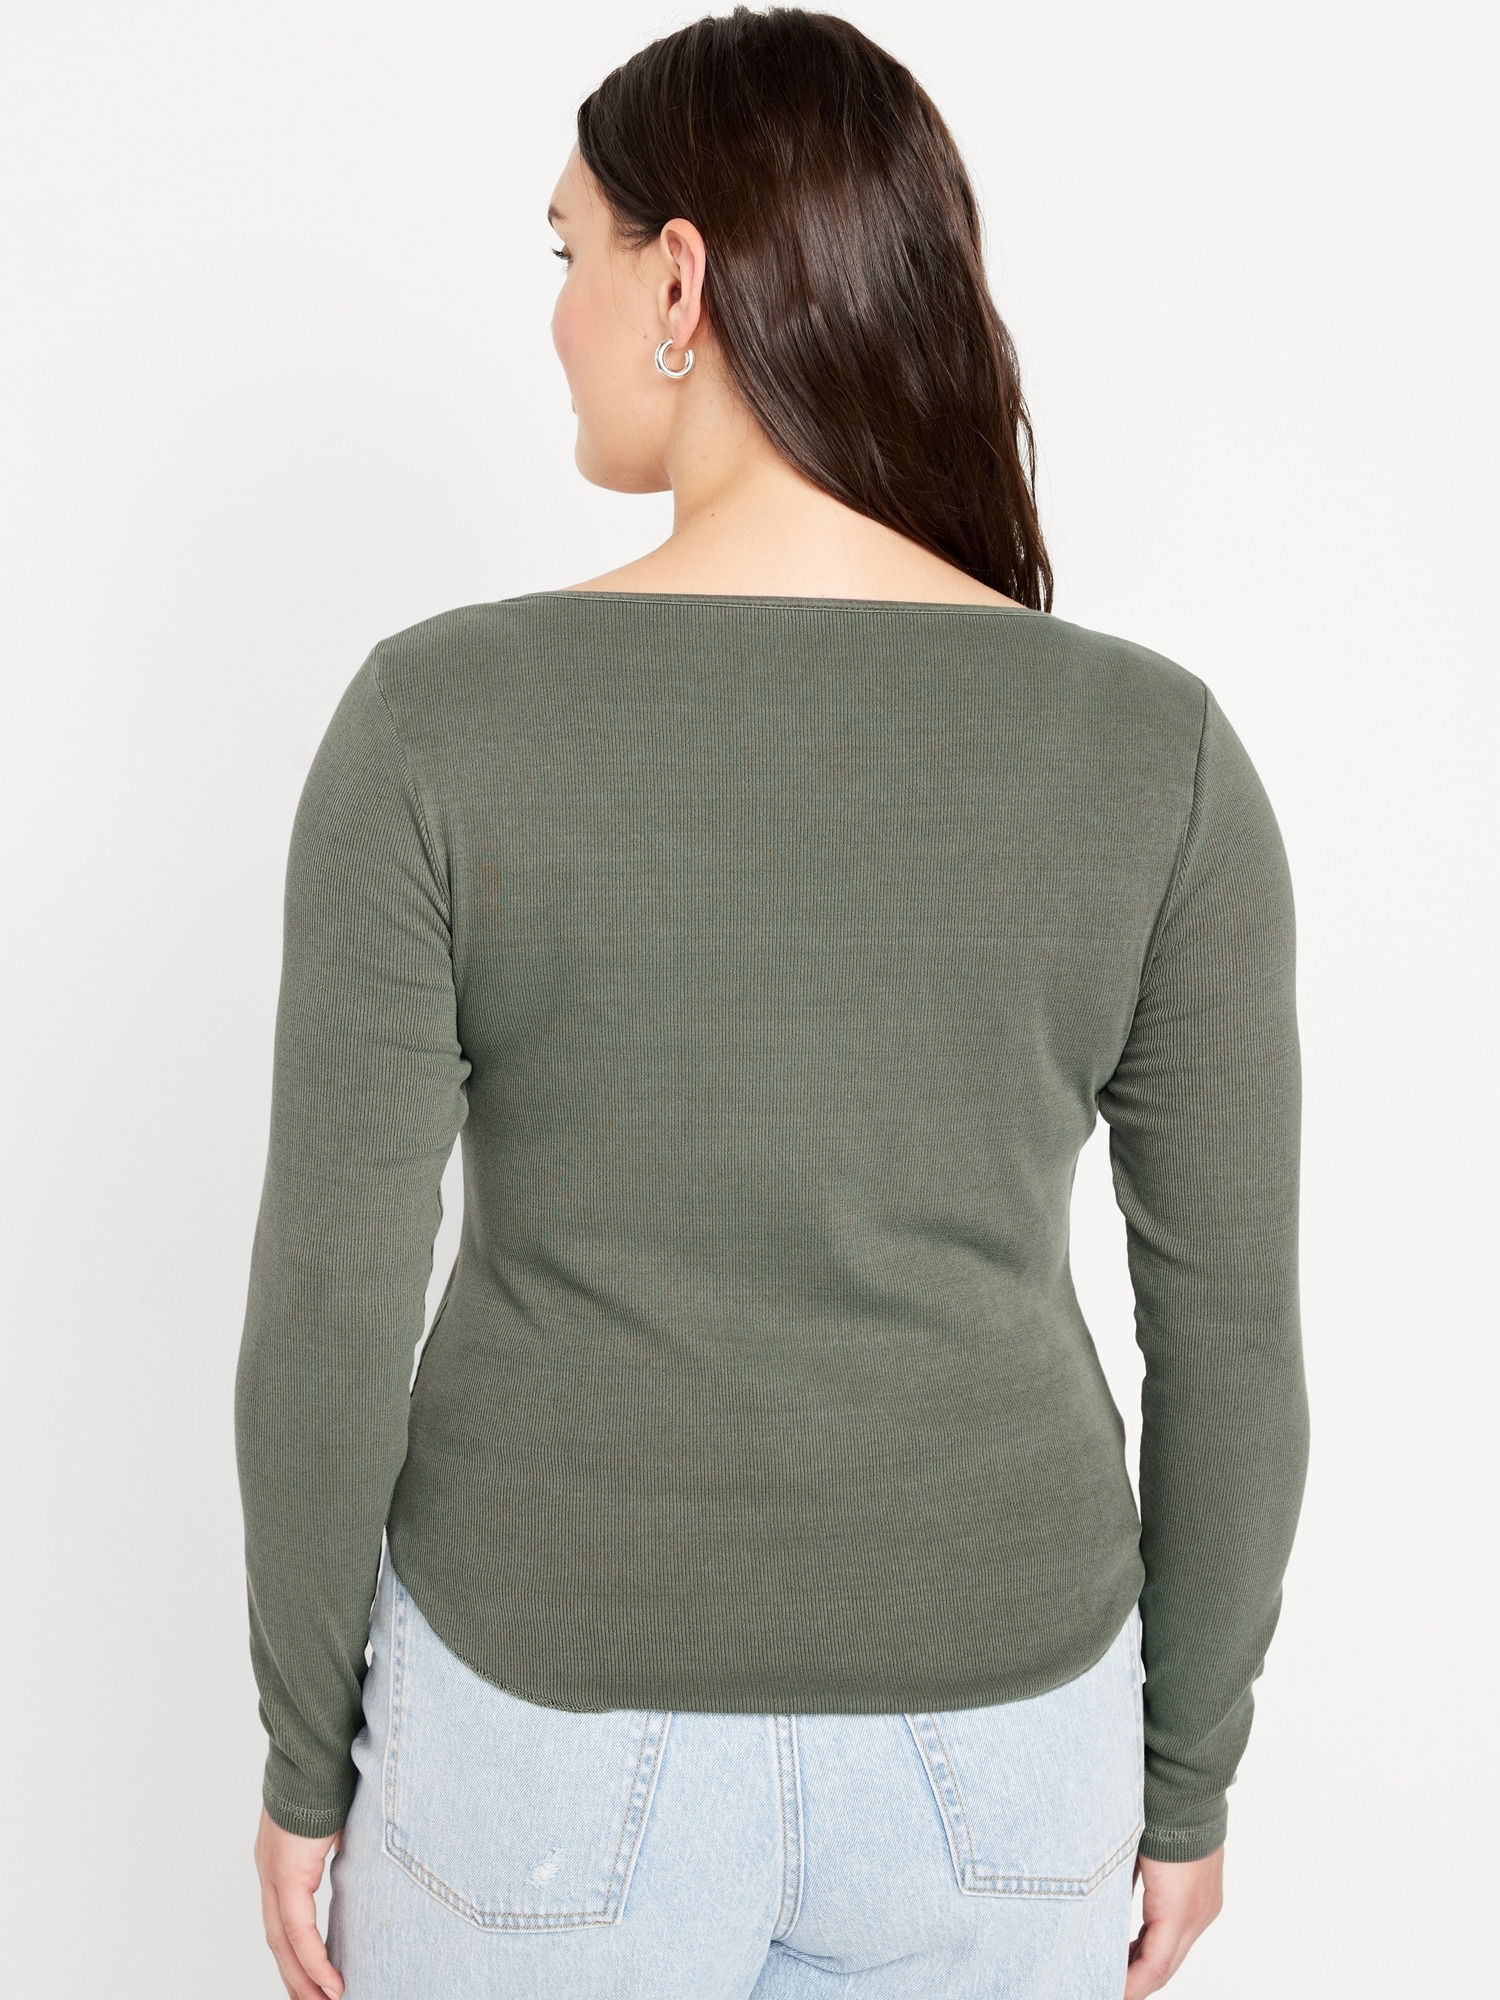 Fitted Long-Sleeve Rib-Knit T-Shirt | Old Navy